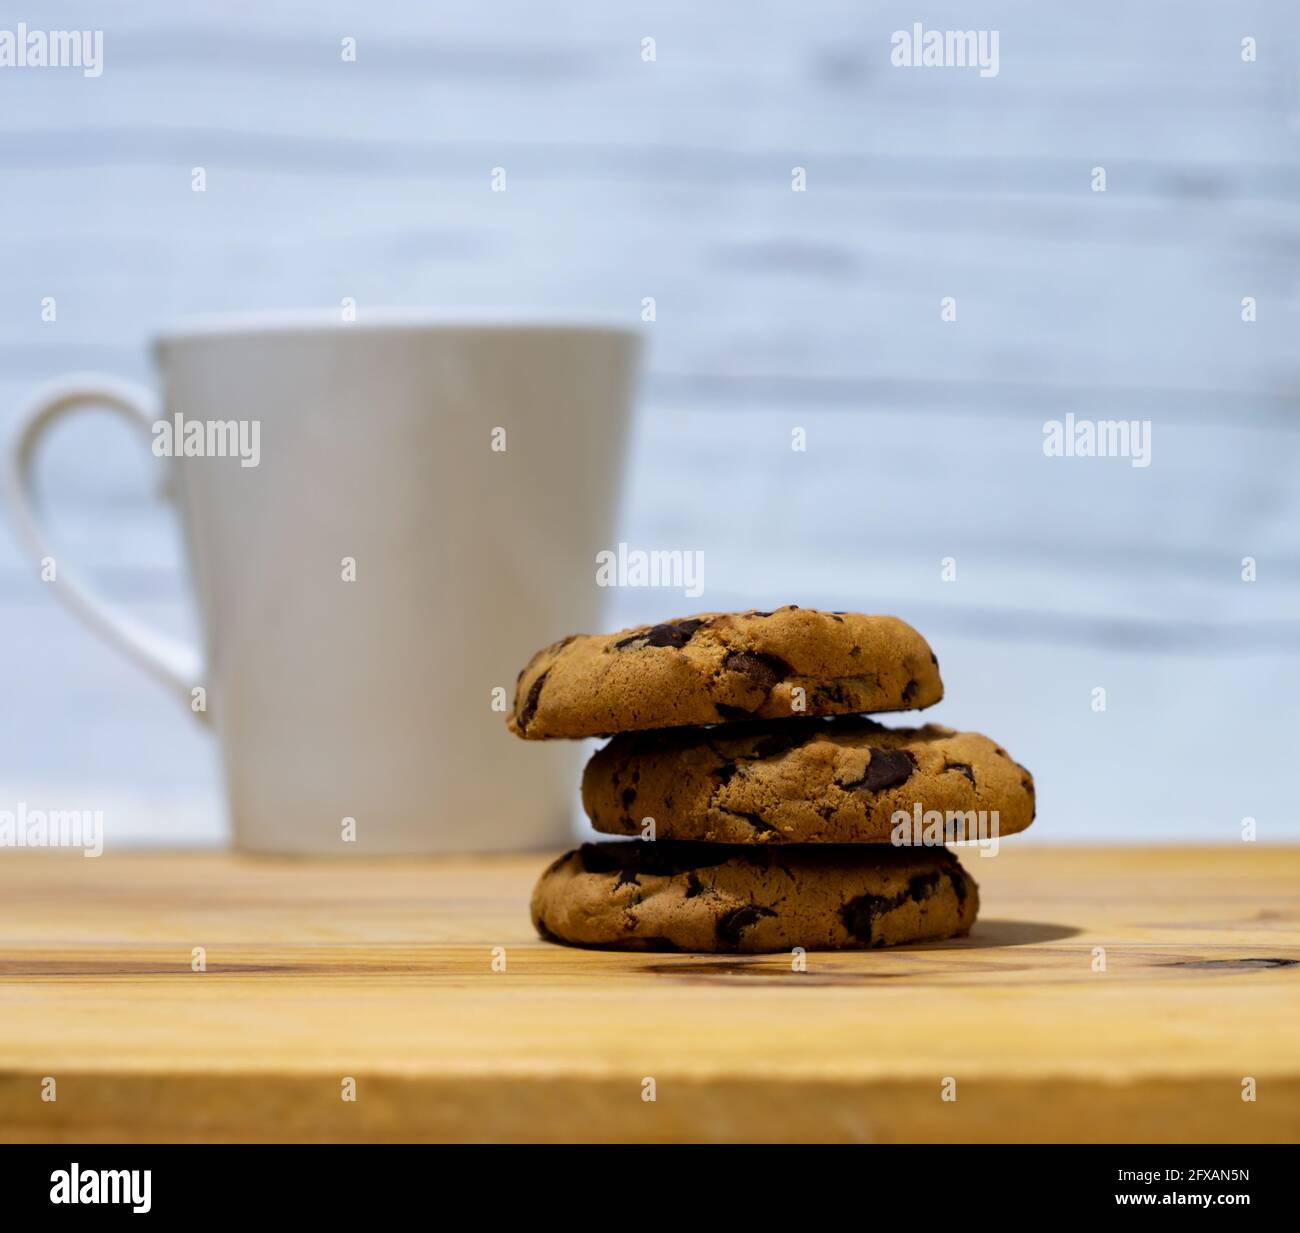 Pile of three Chocolate chips cookies with a coffee cup on a wooden table, white empty background Stock Photo